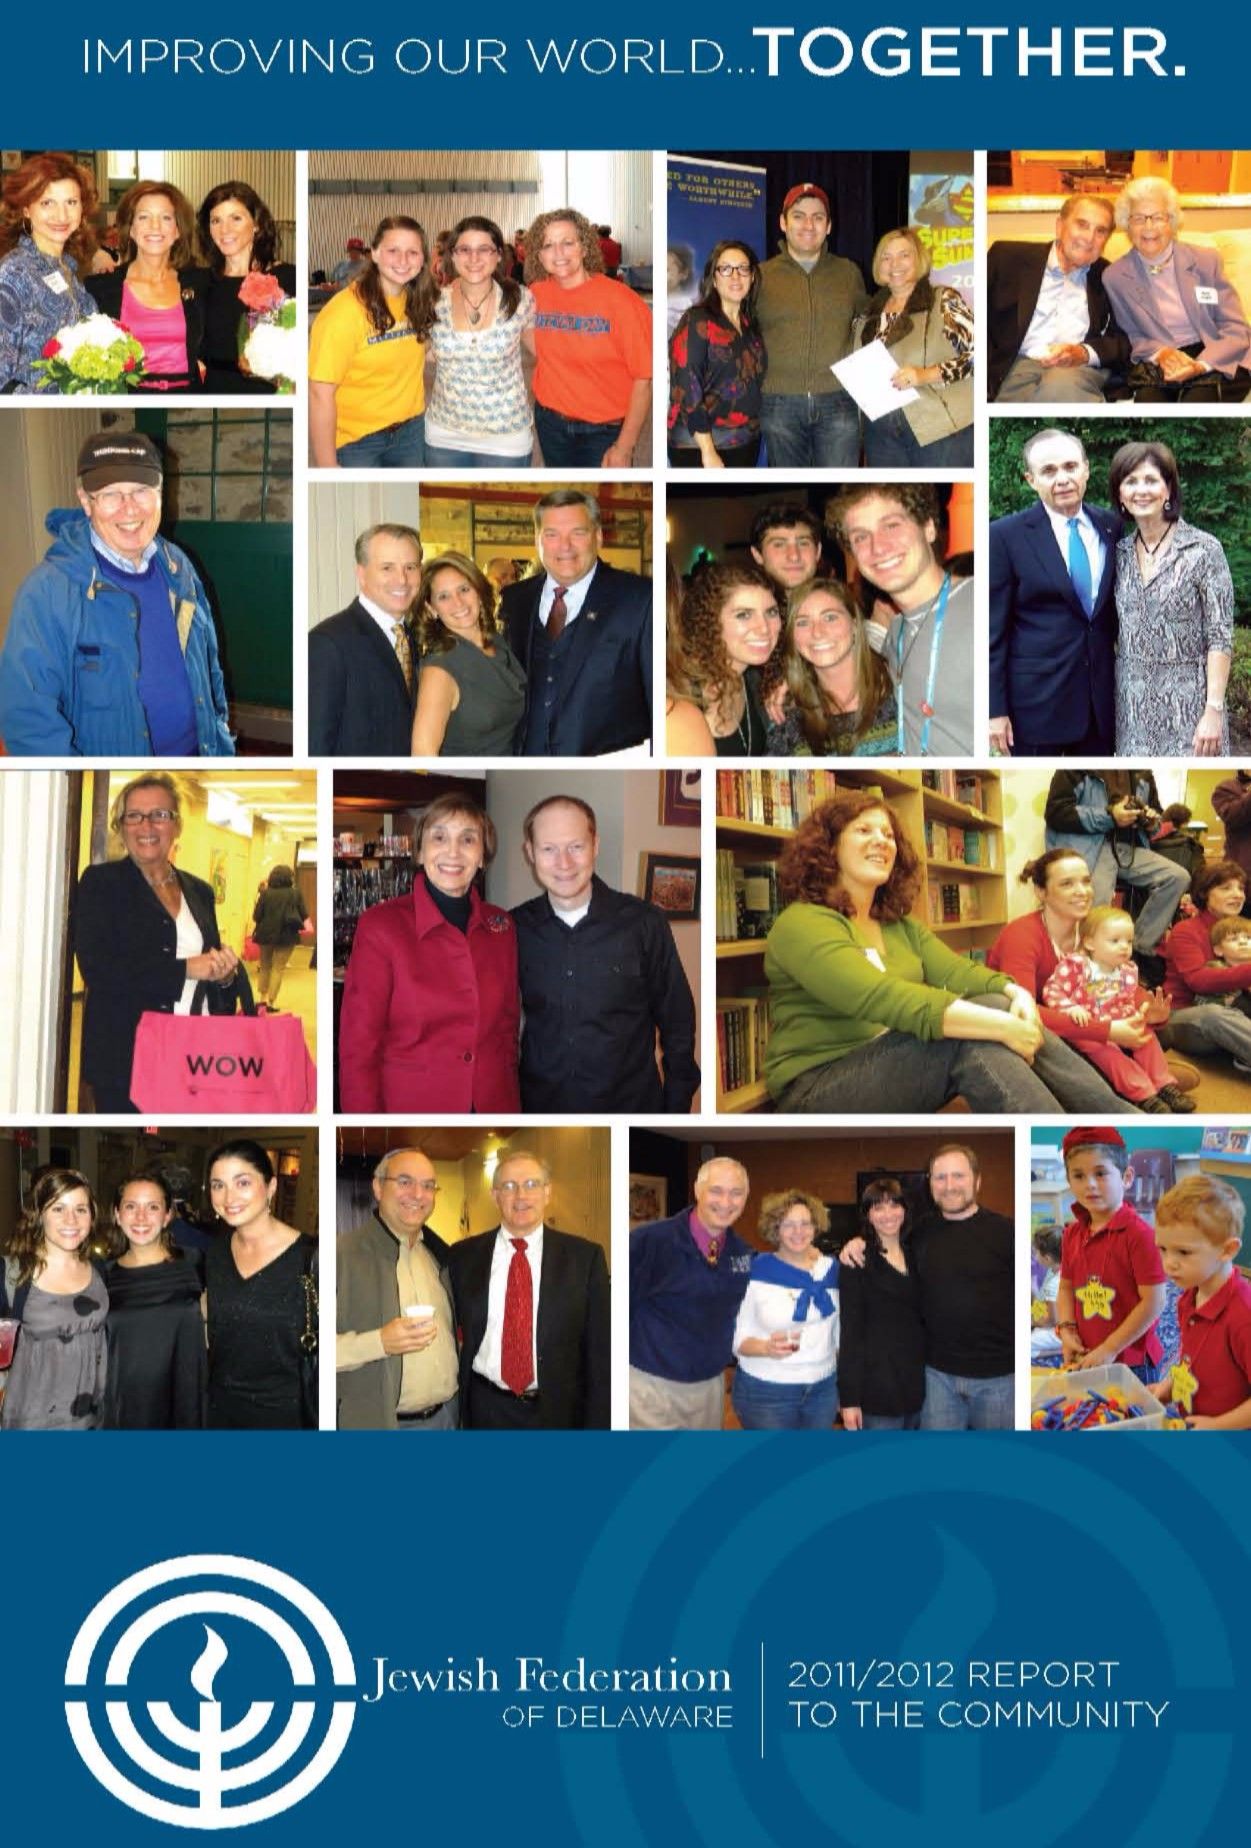 Click HERE to view the 2011-2012 Report to the Community